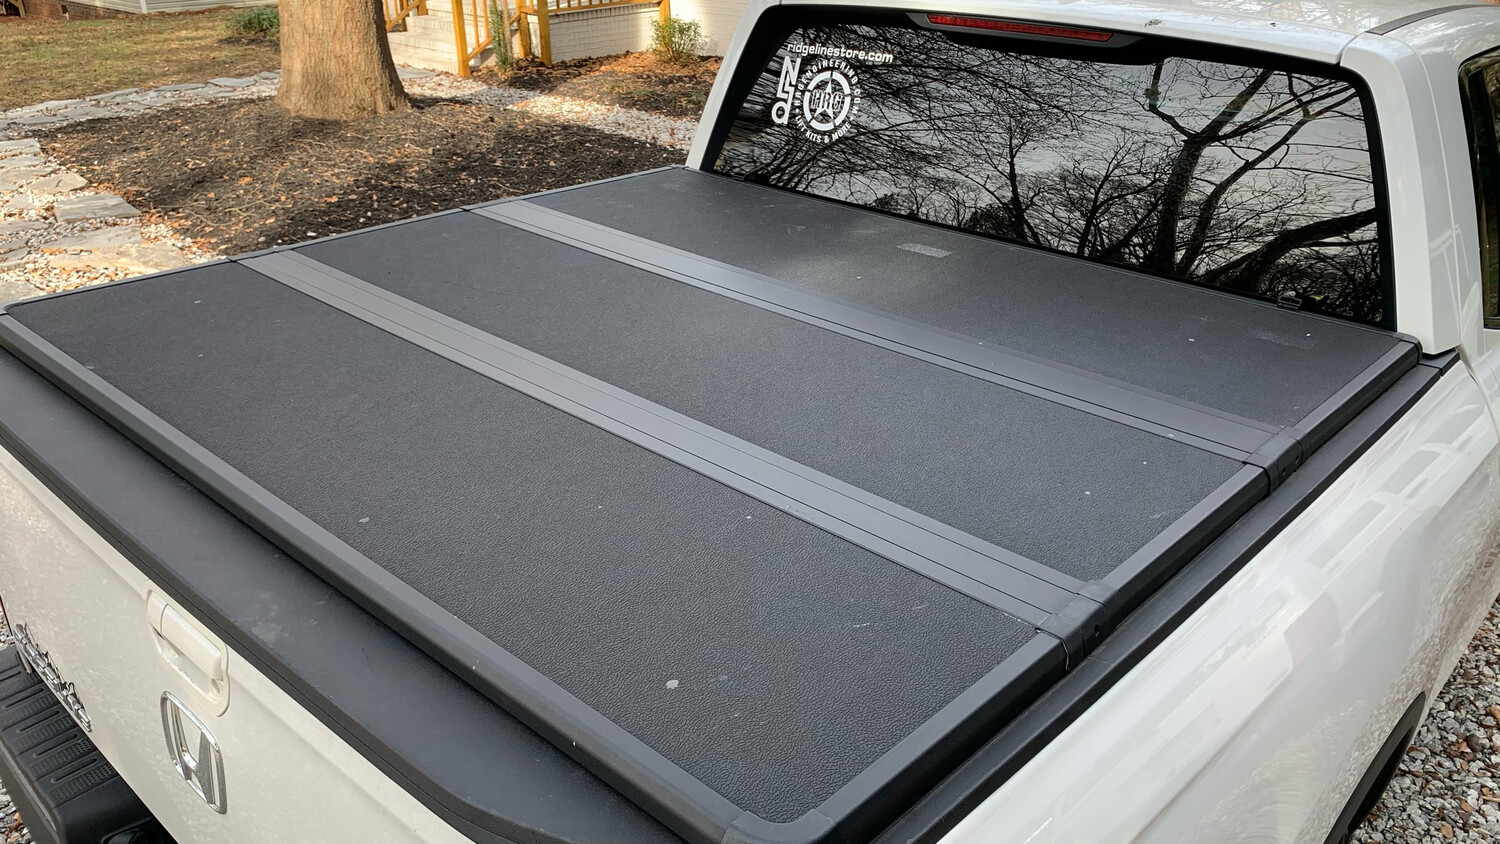 New Improved Honda OEM Ridgeline Hard Tonneau BedCover Bed Cover - Fits 2017 to 2024 Updated Version